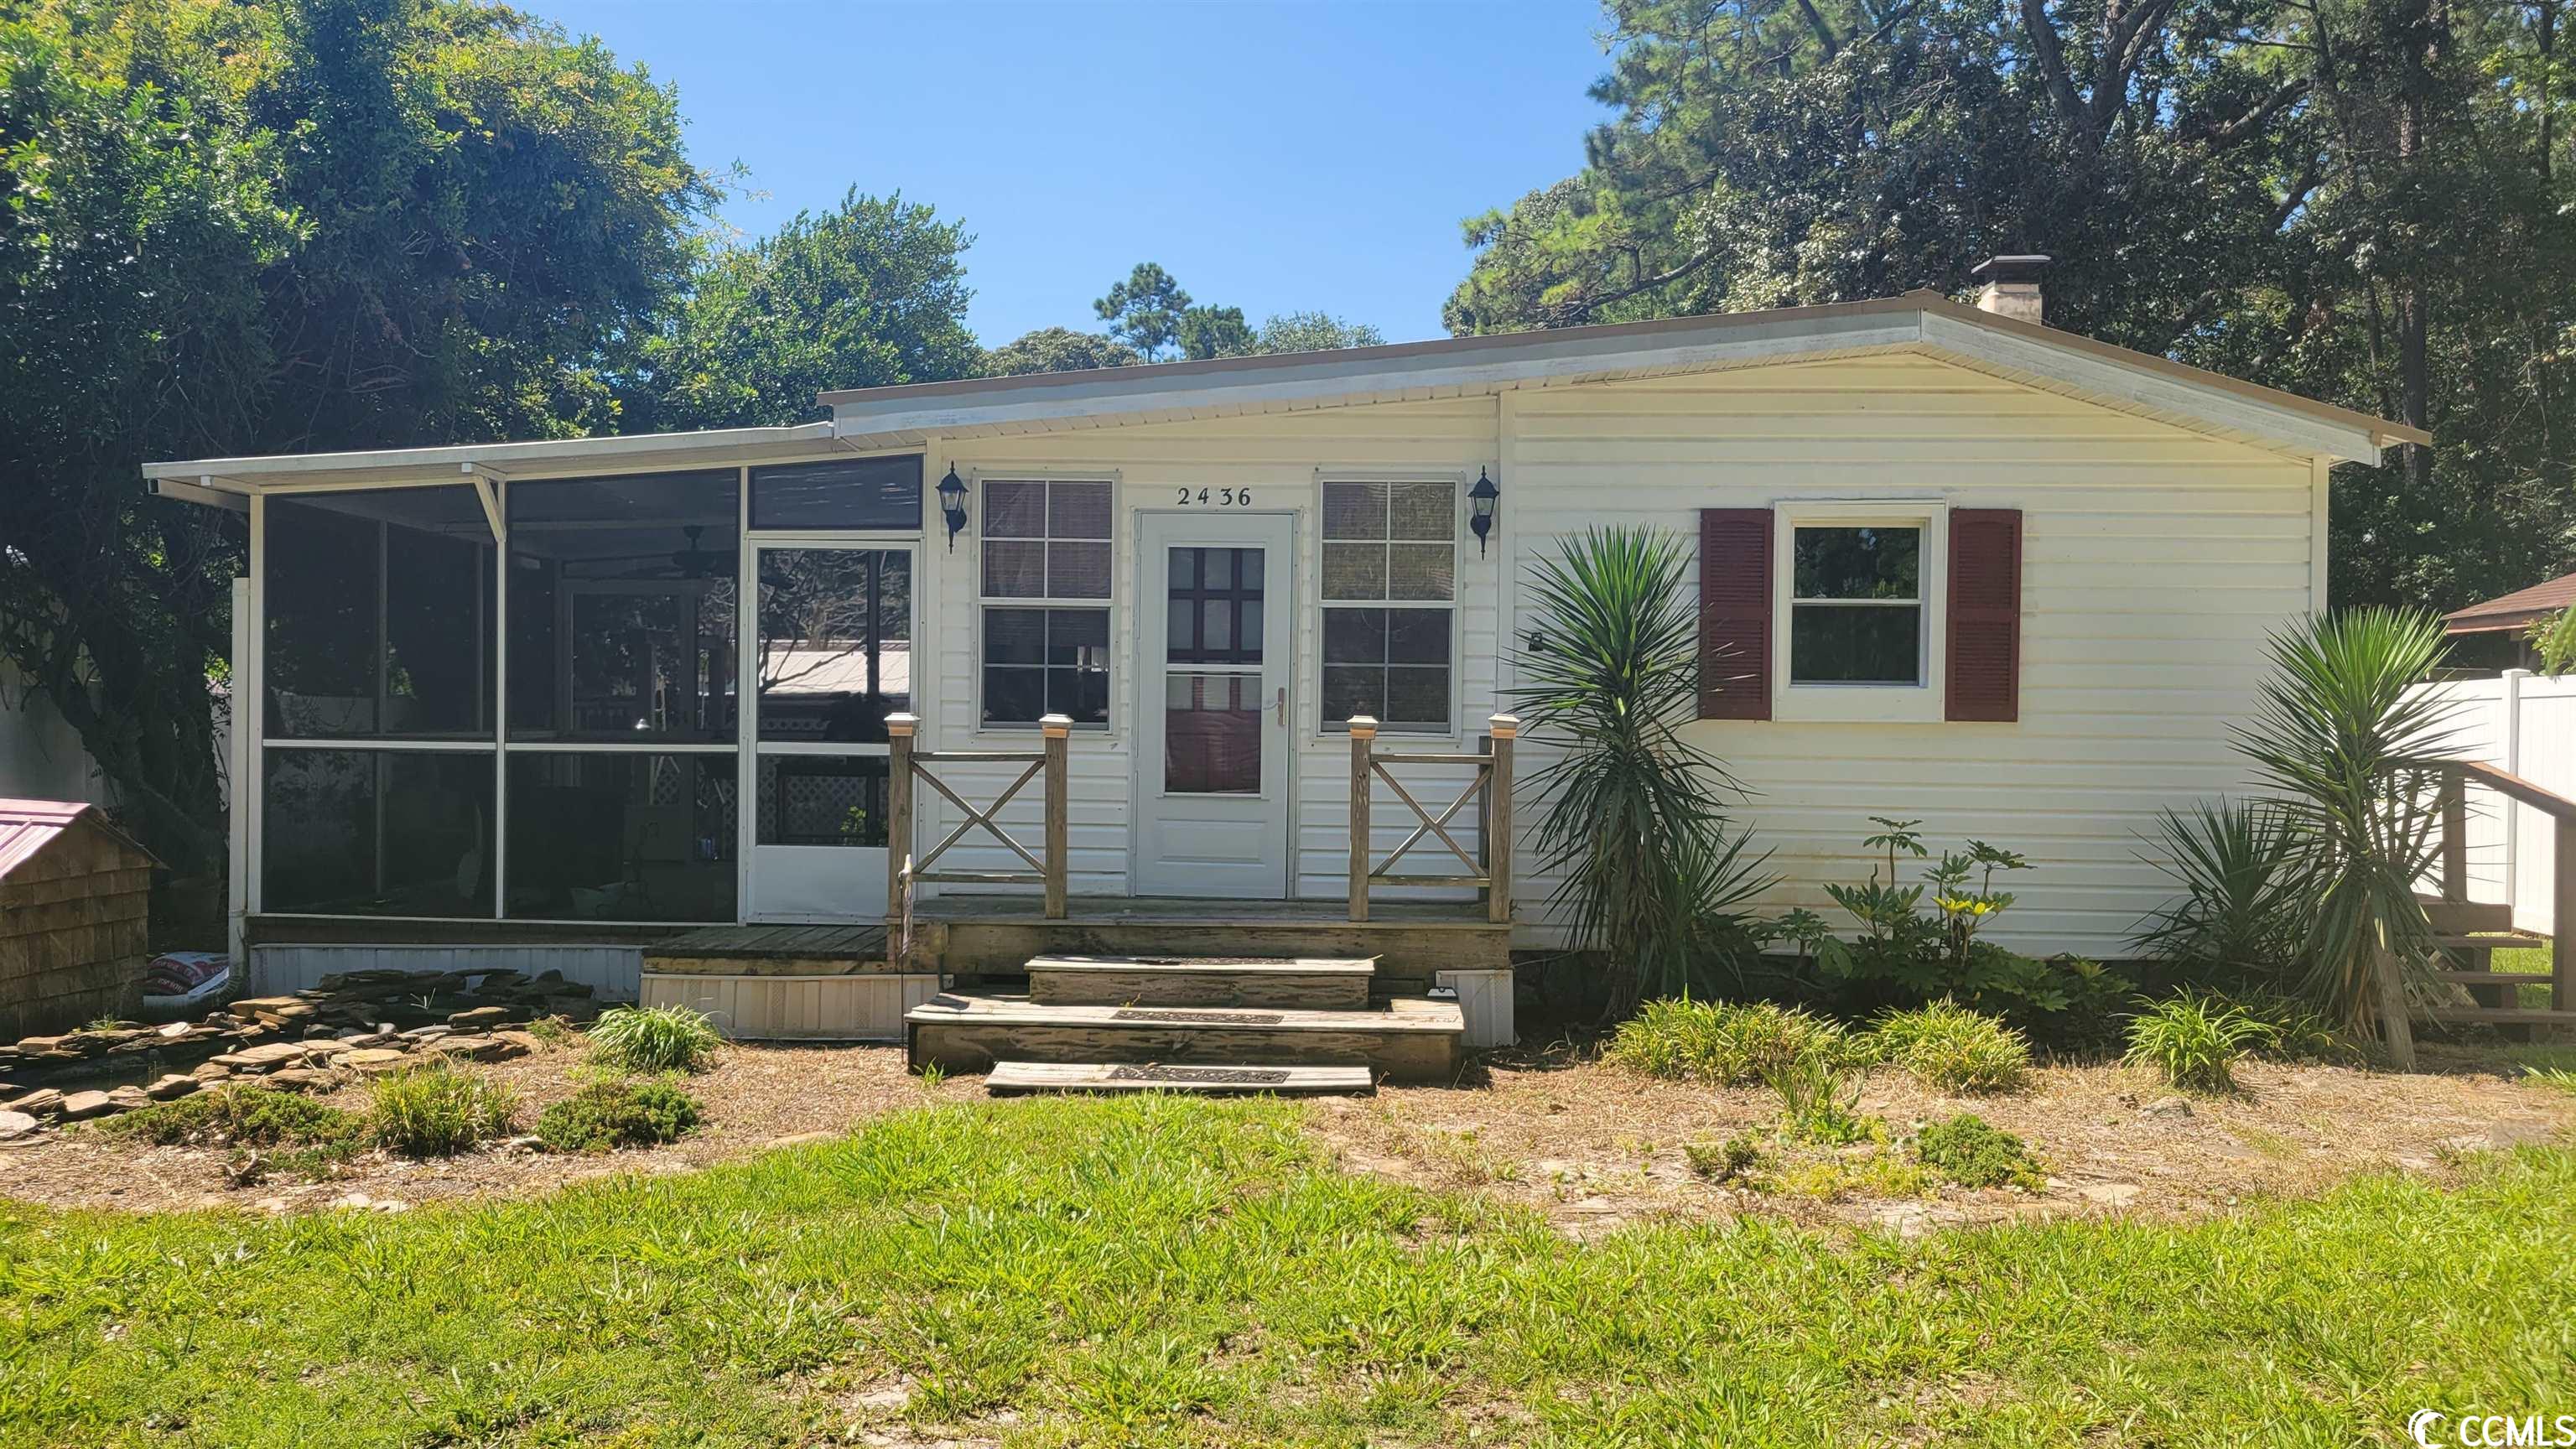 now's your chance to own this unique property in cherry grove section of north myrtle beach! this 3 bedroom, 2 bath has been split into 2 living areas. each side has its own kitchen and living room. property has large detached workshop with electric and covered areas for your bikes or jet skis, new white vinyl privacy fence, screen porch, fire pit area, and more. remodeling has been started and is waiting on you to finish!